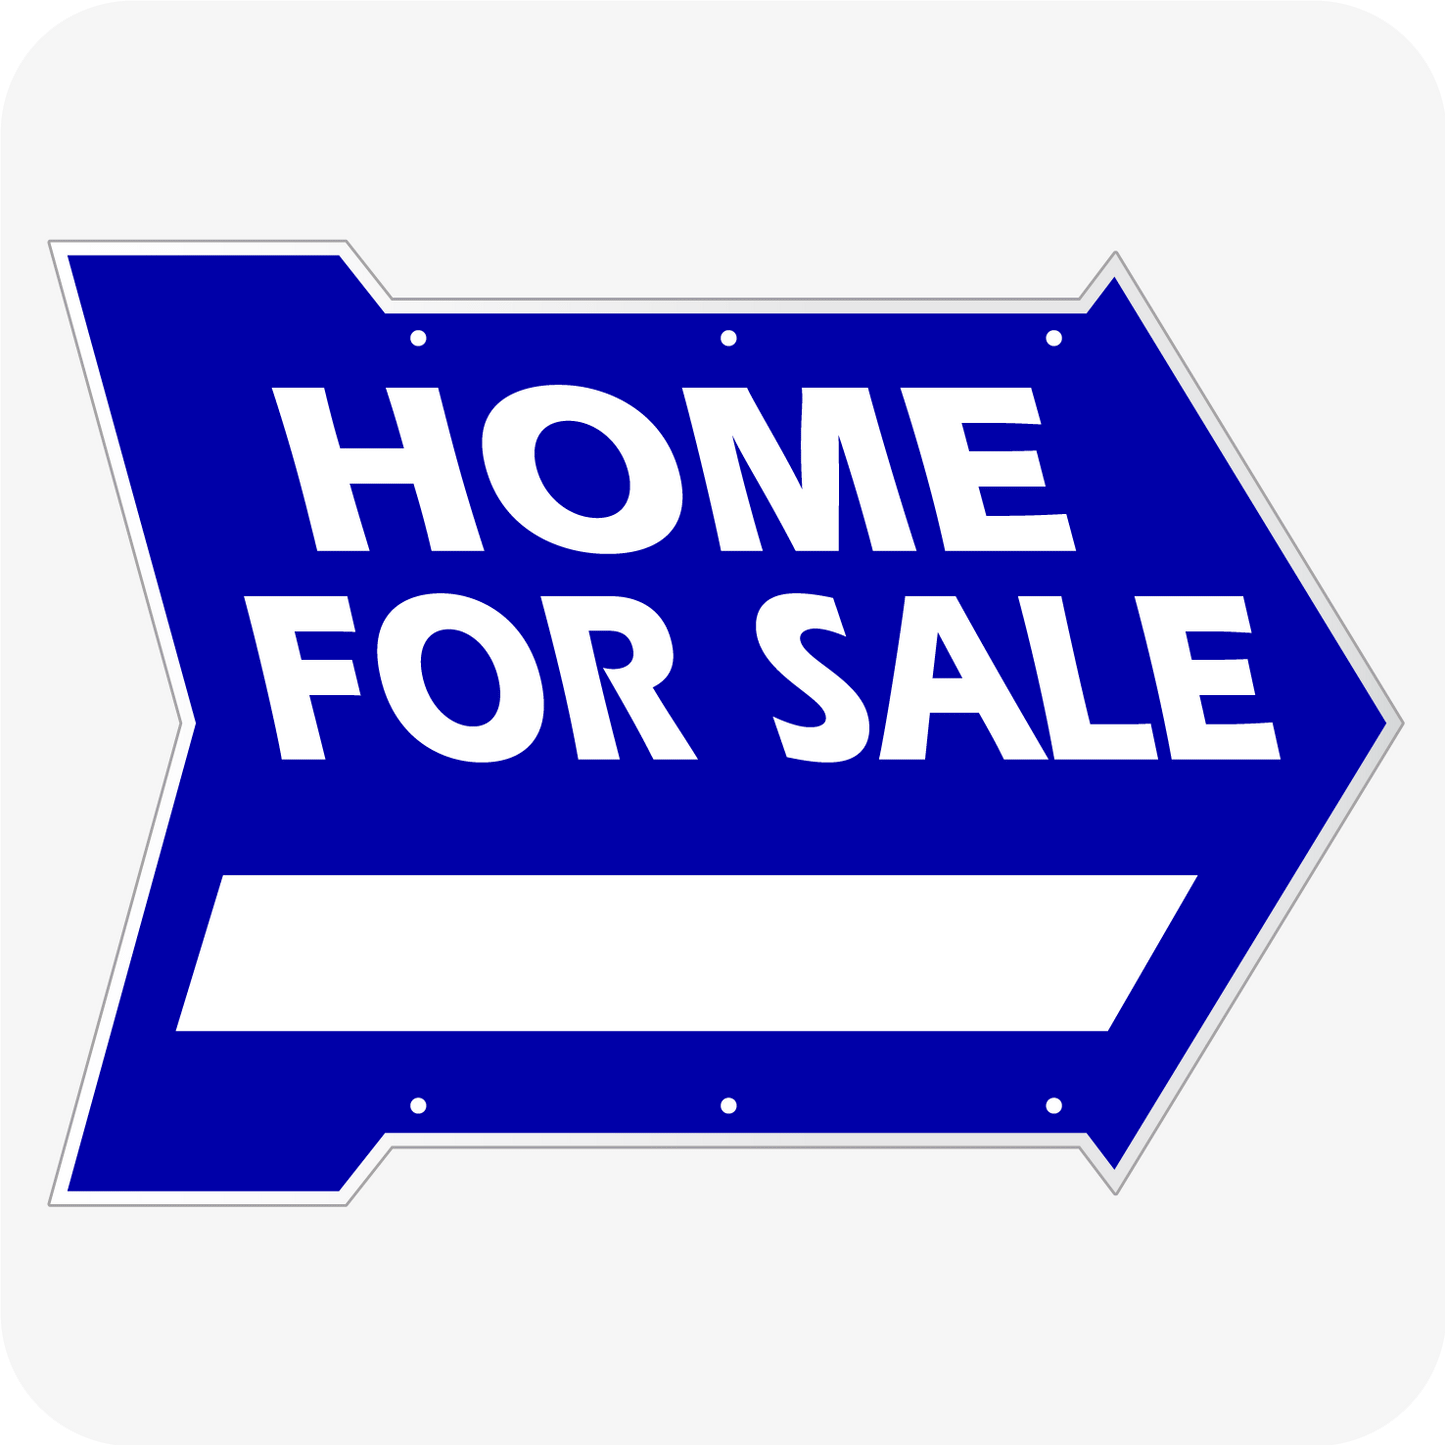 Home for Sale 18 x 24 Arrow with Blank - Blue